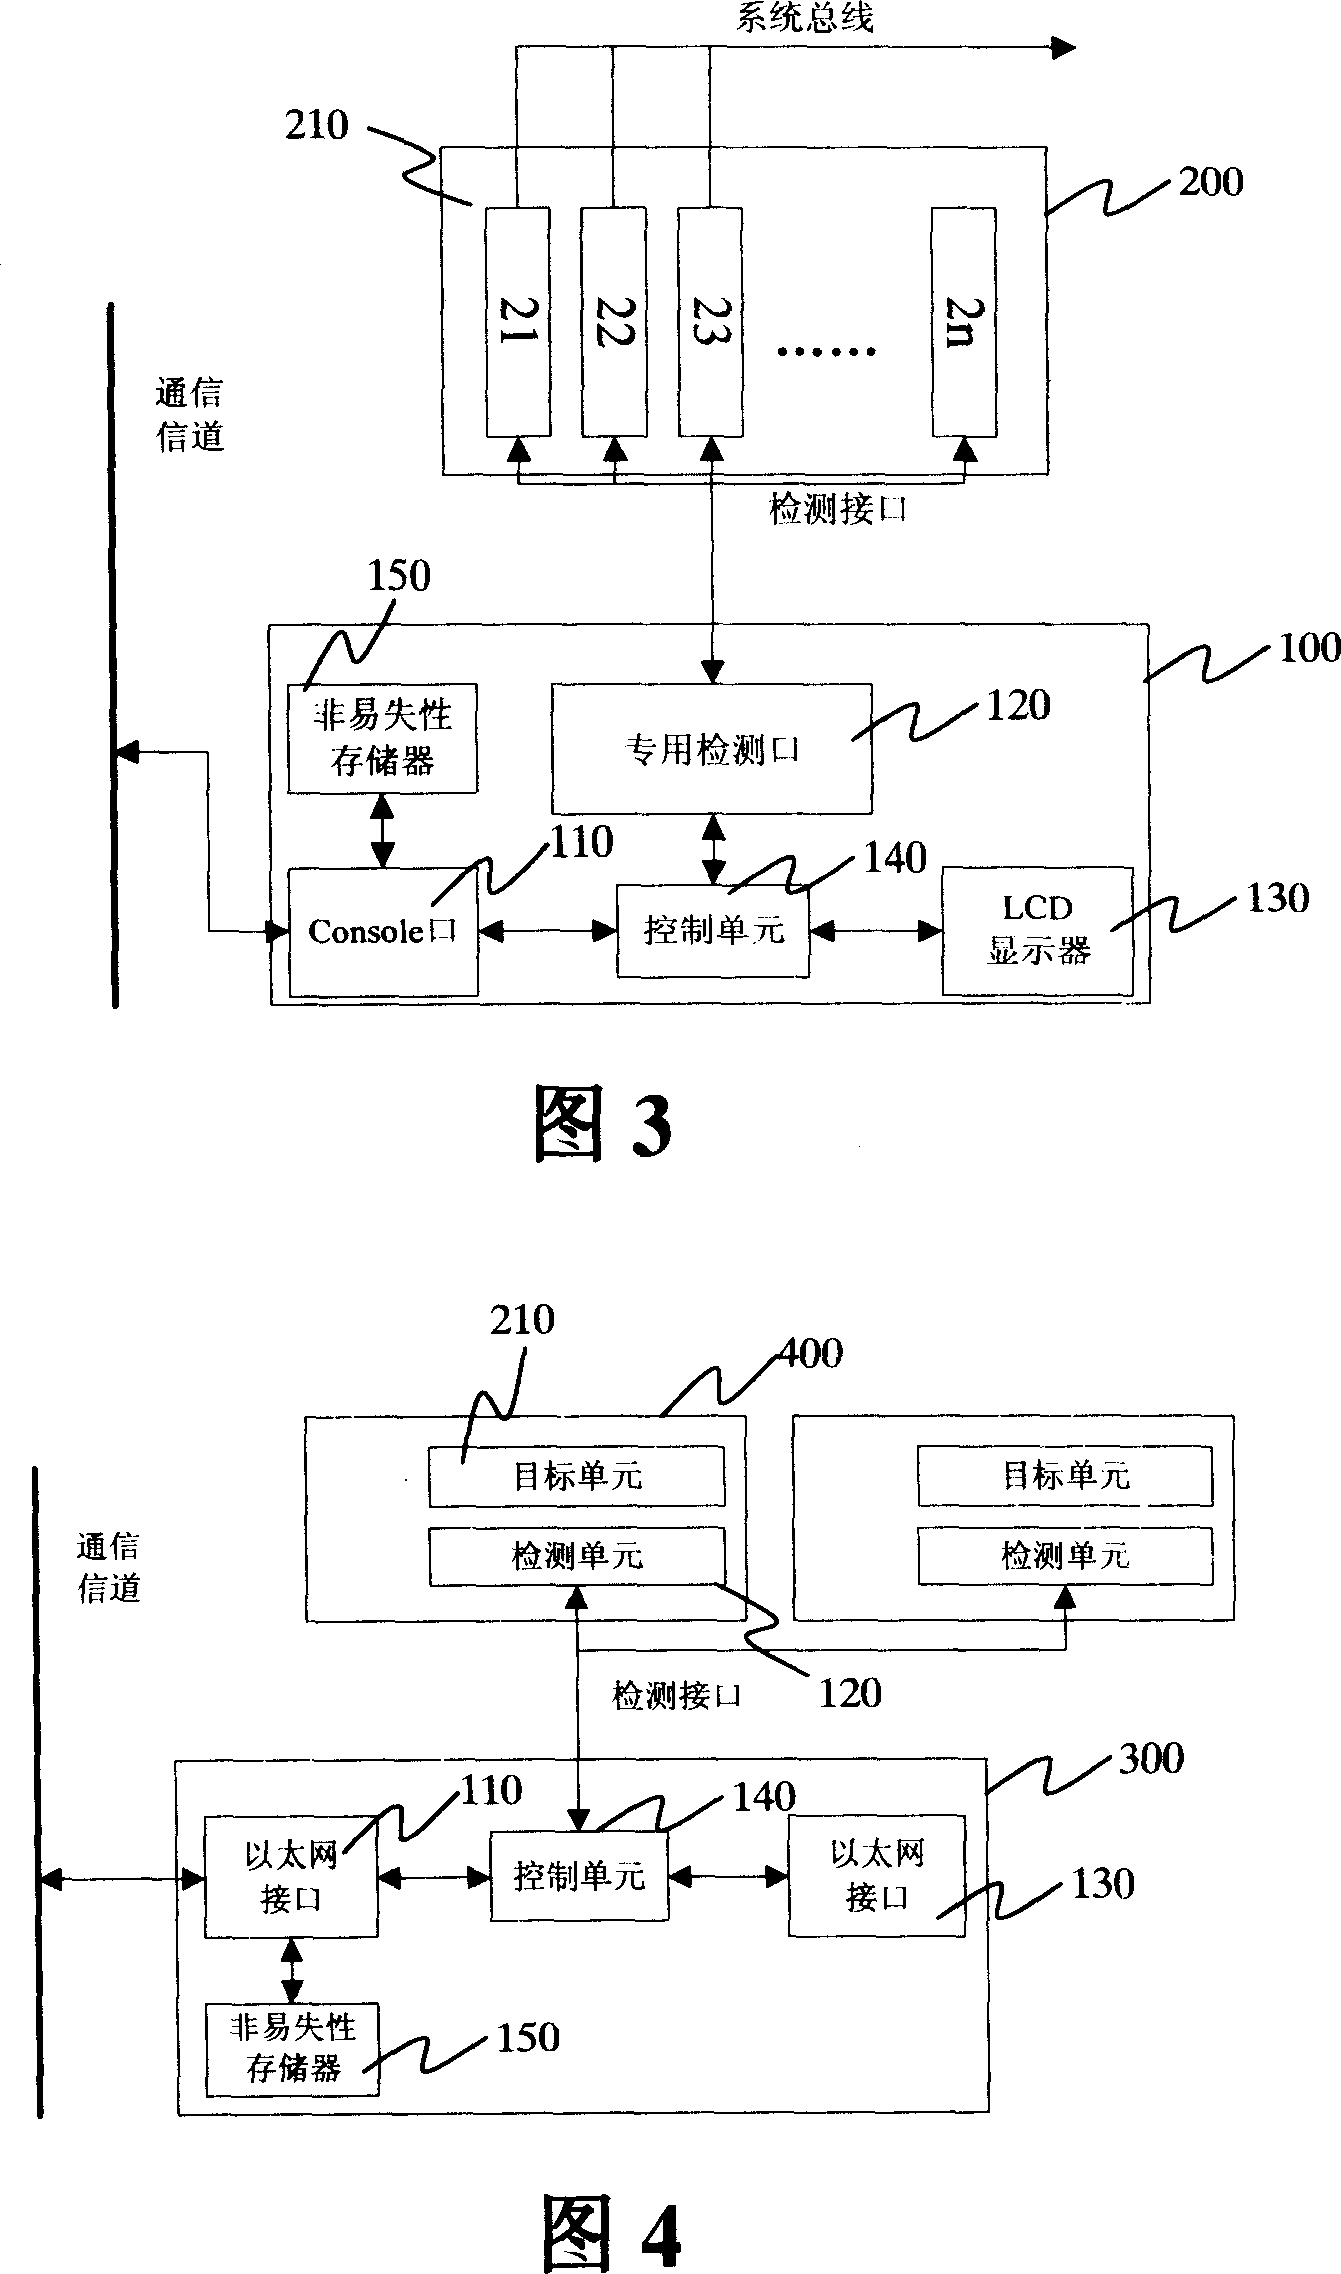 System fault detecting method and device